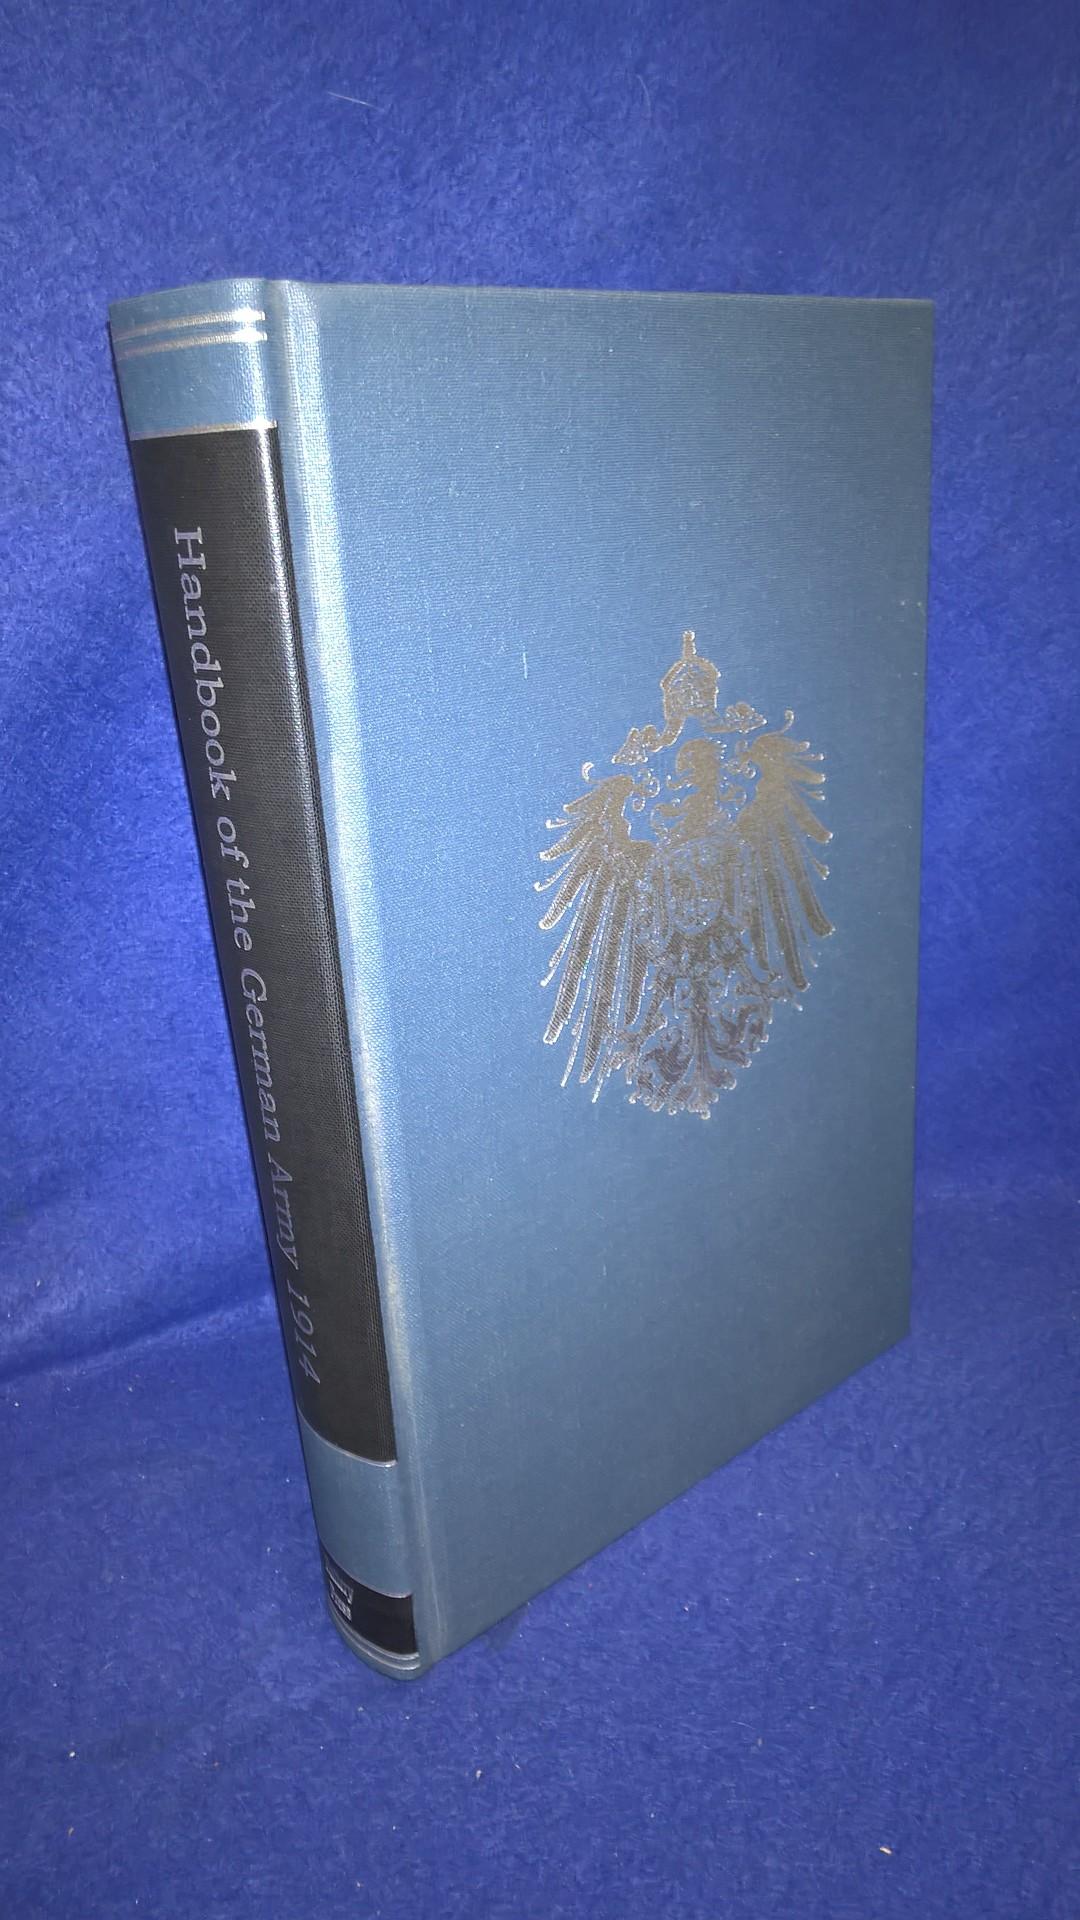 Handbook of the German Army (Home and Colonial). Revised by the German Staff, War Office 1912 (Amended to August 1914). Reprint!